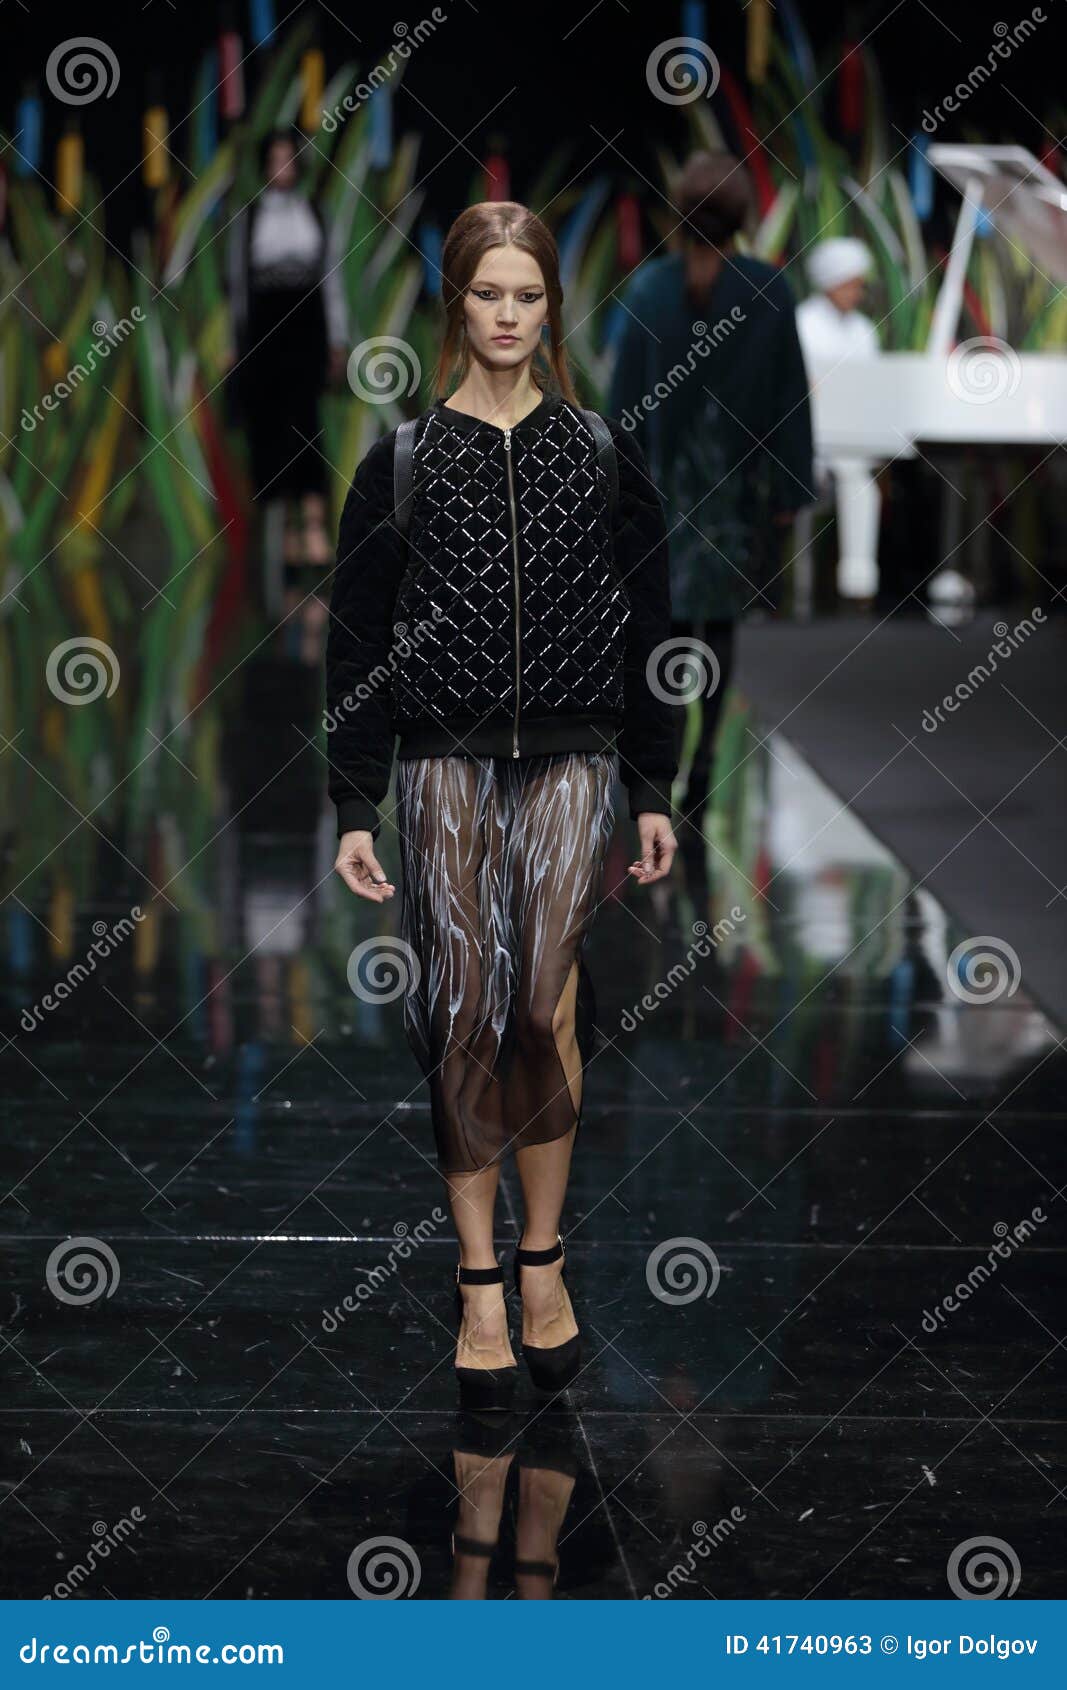 Moscow Fashion Week editorial stock photo. Image of parade - 41740963